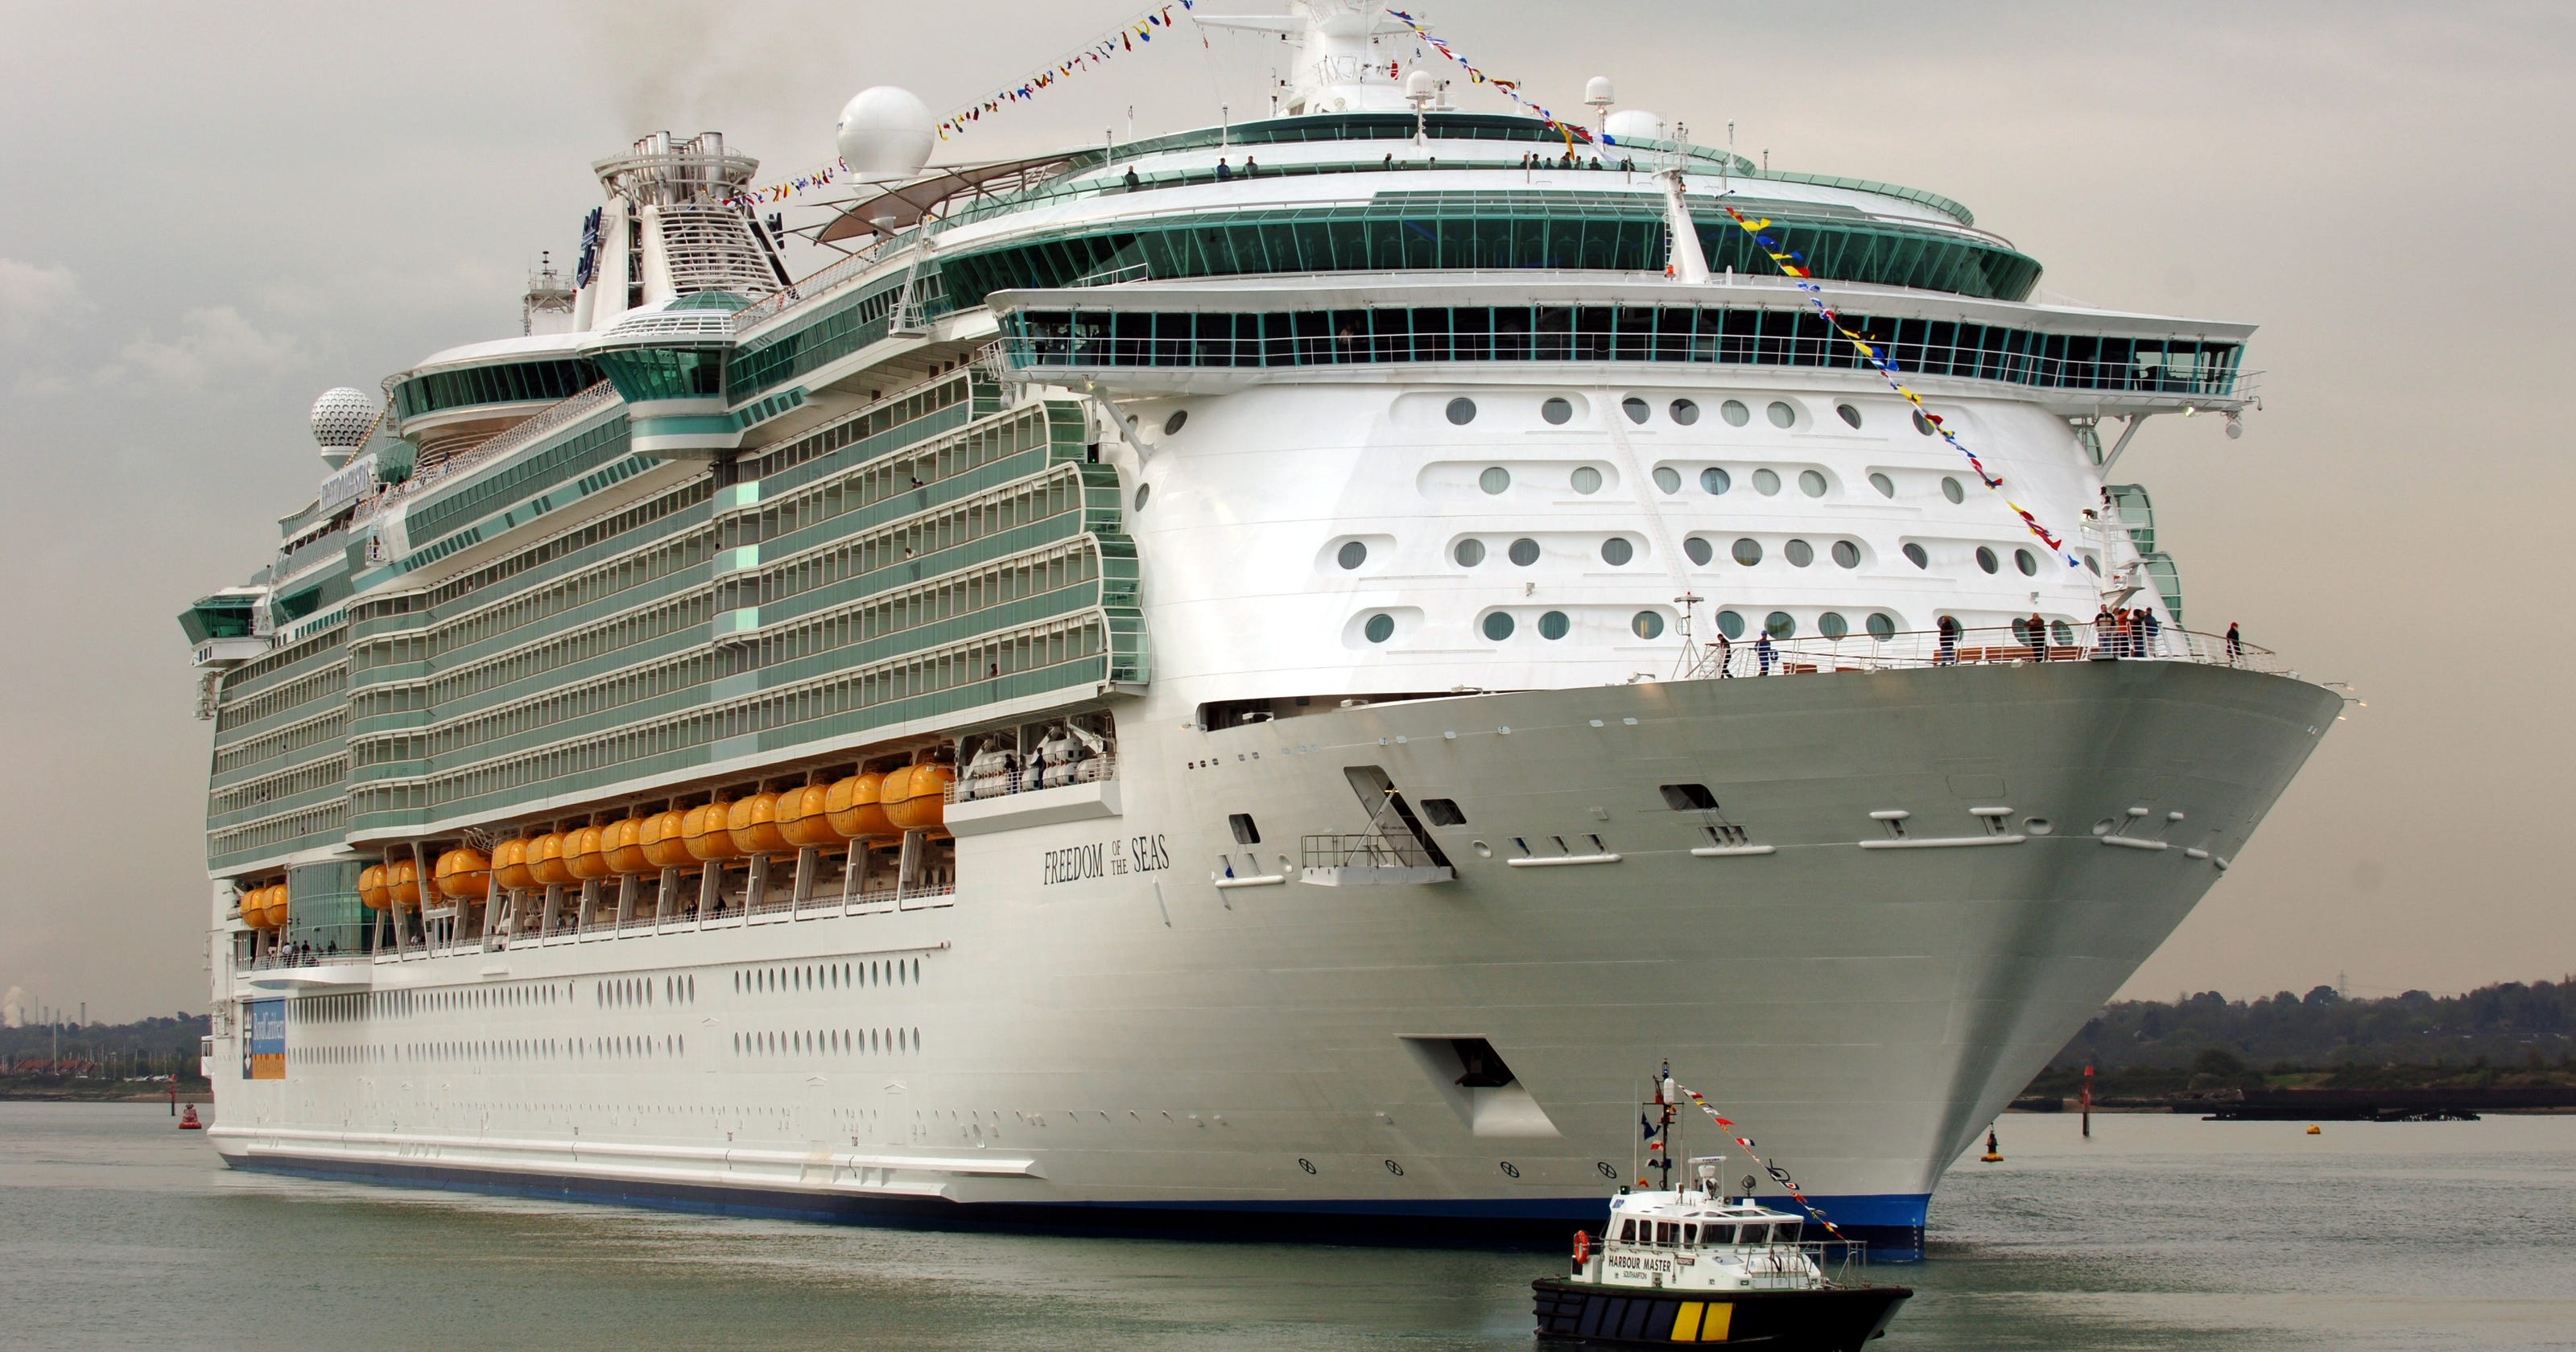 Royal Caribbean plans third ship for Port Canaveral3200 x 1680